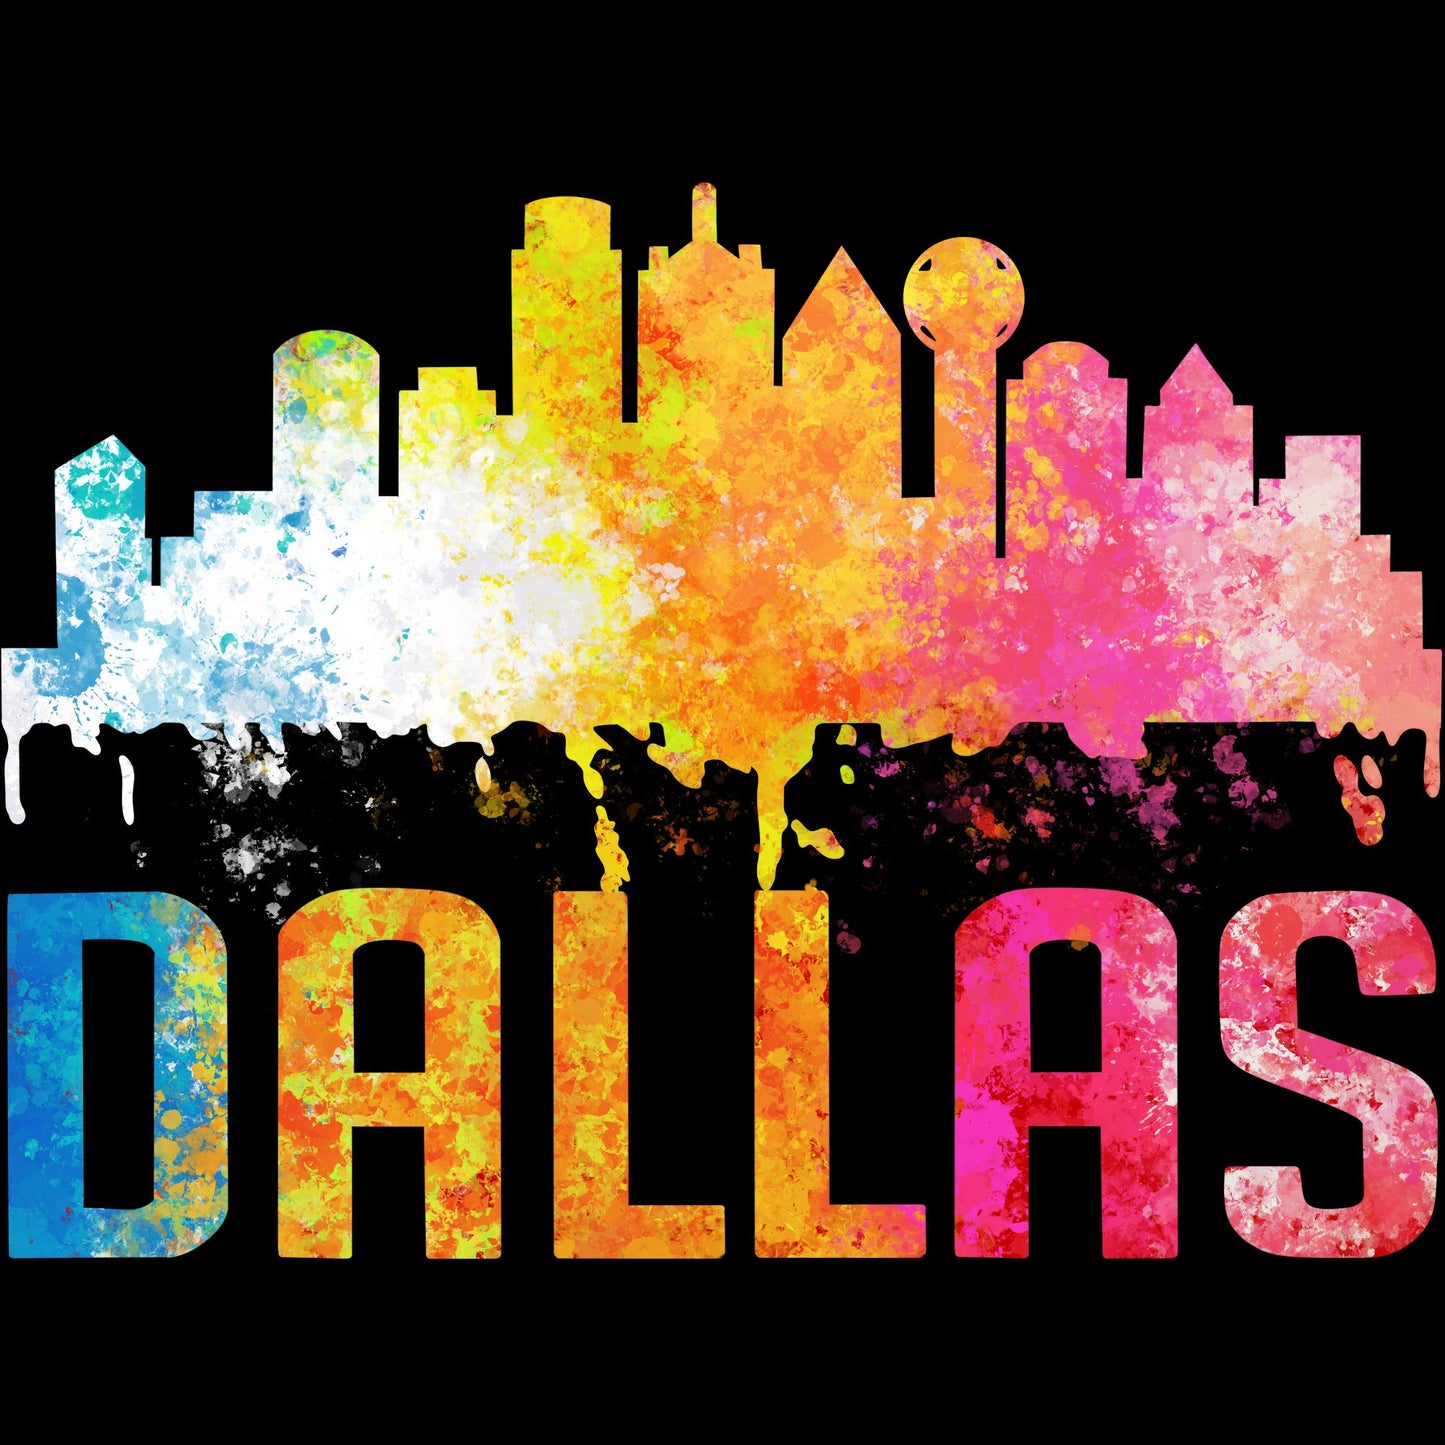 Dallas Downtown Multi-Colors T-Shirt: Embrace Urban Vibes with this Stylish Tee - Perfect Blend of Dallas Pride and Cityscape